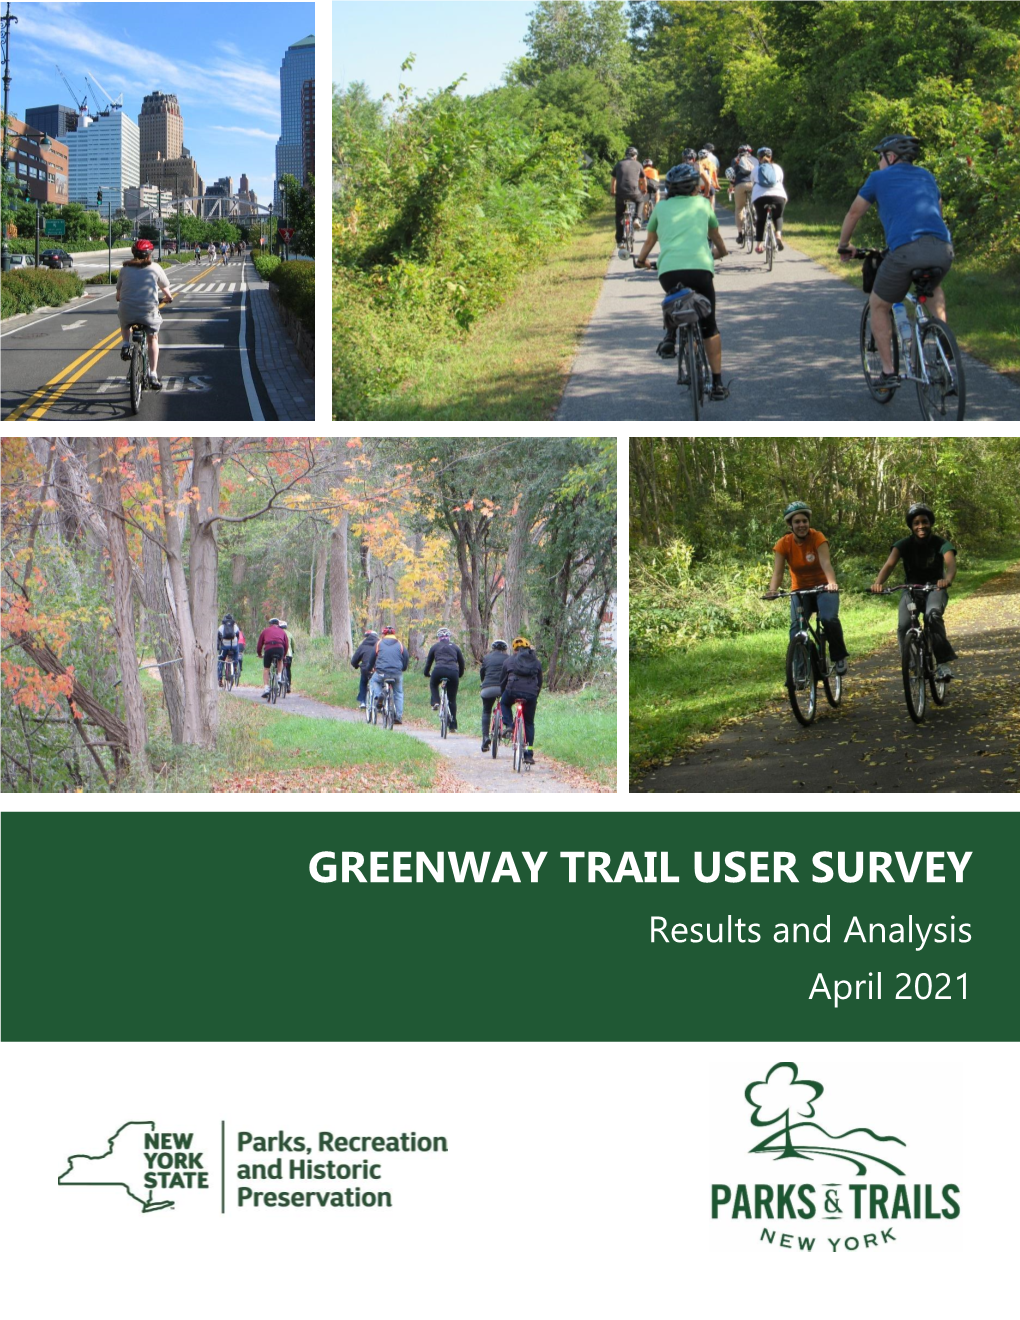 Greenway Trail User Survey: Results and Analysis